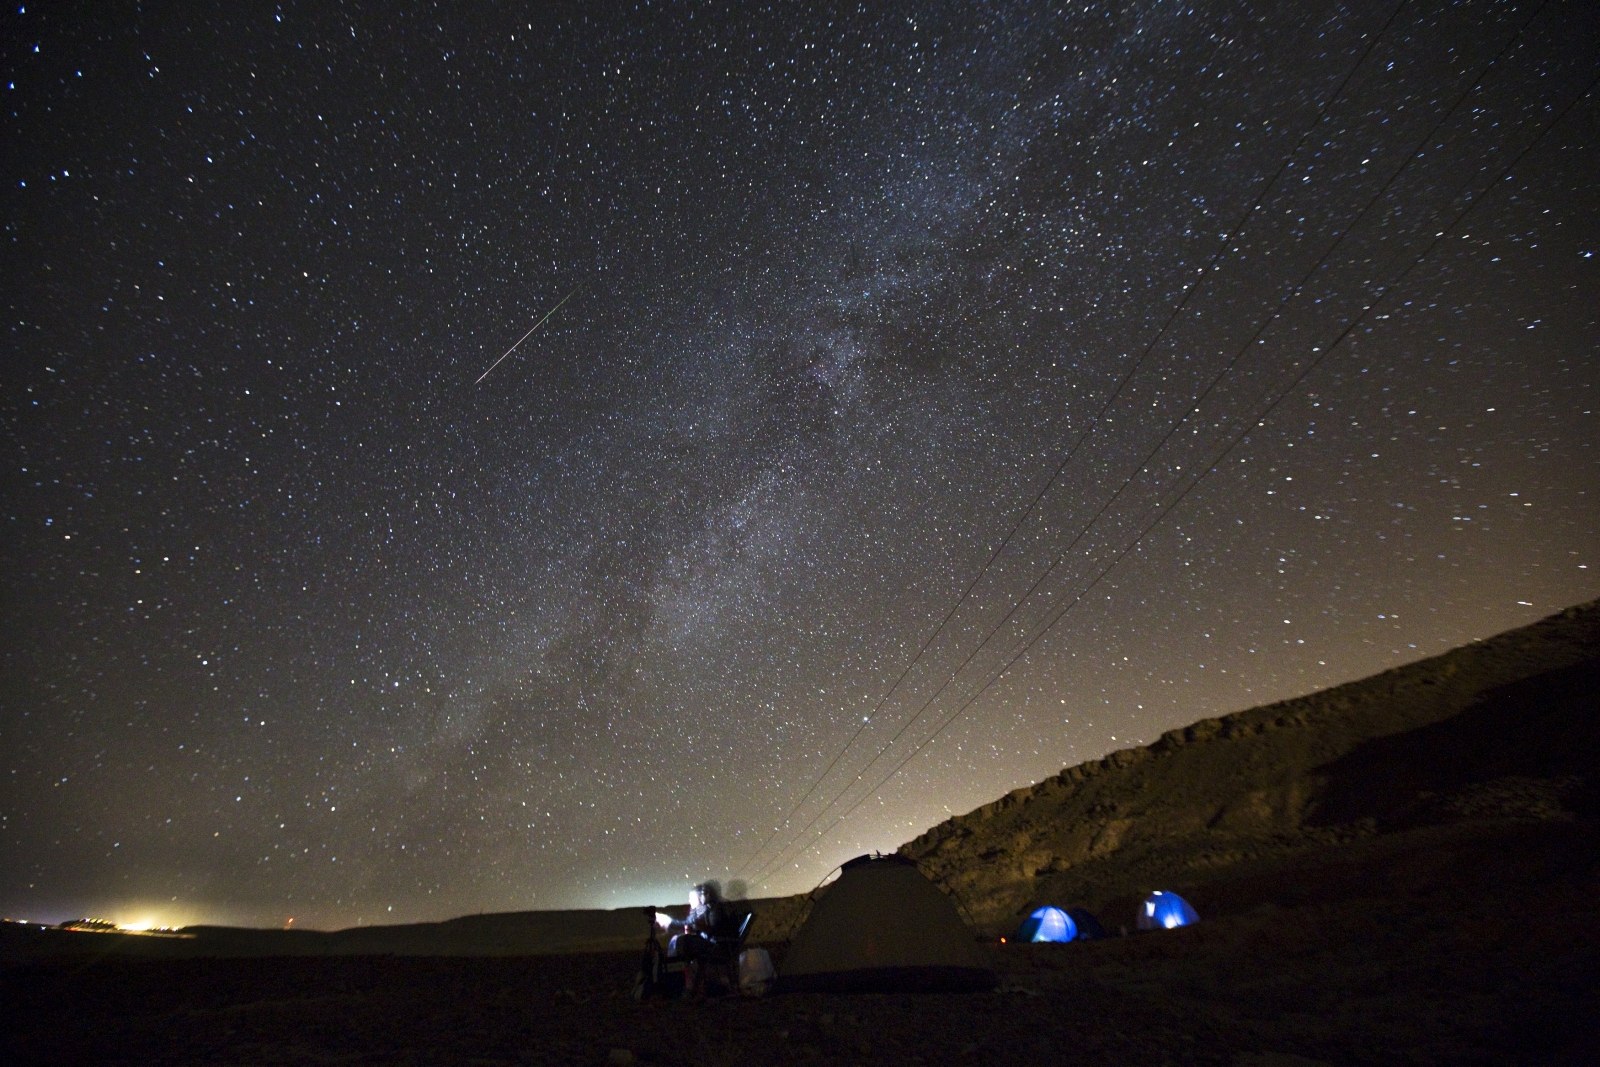 Perseid meteor shower Skies sparkle as annual phenomena reaches its